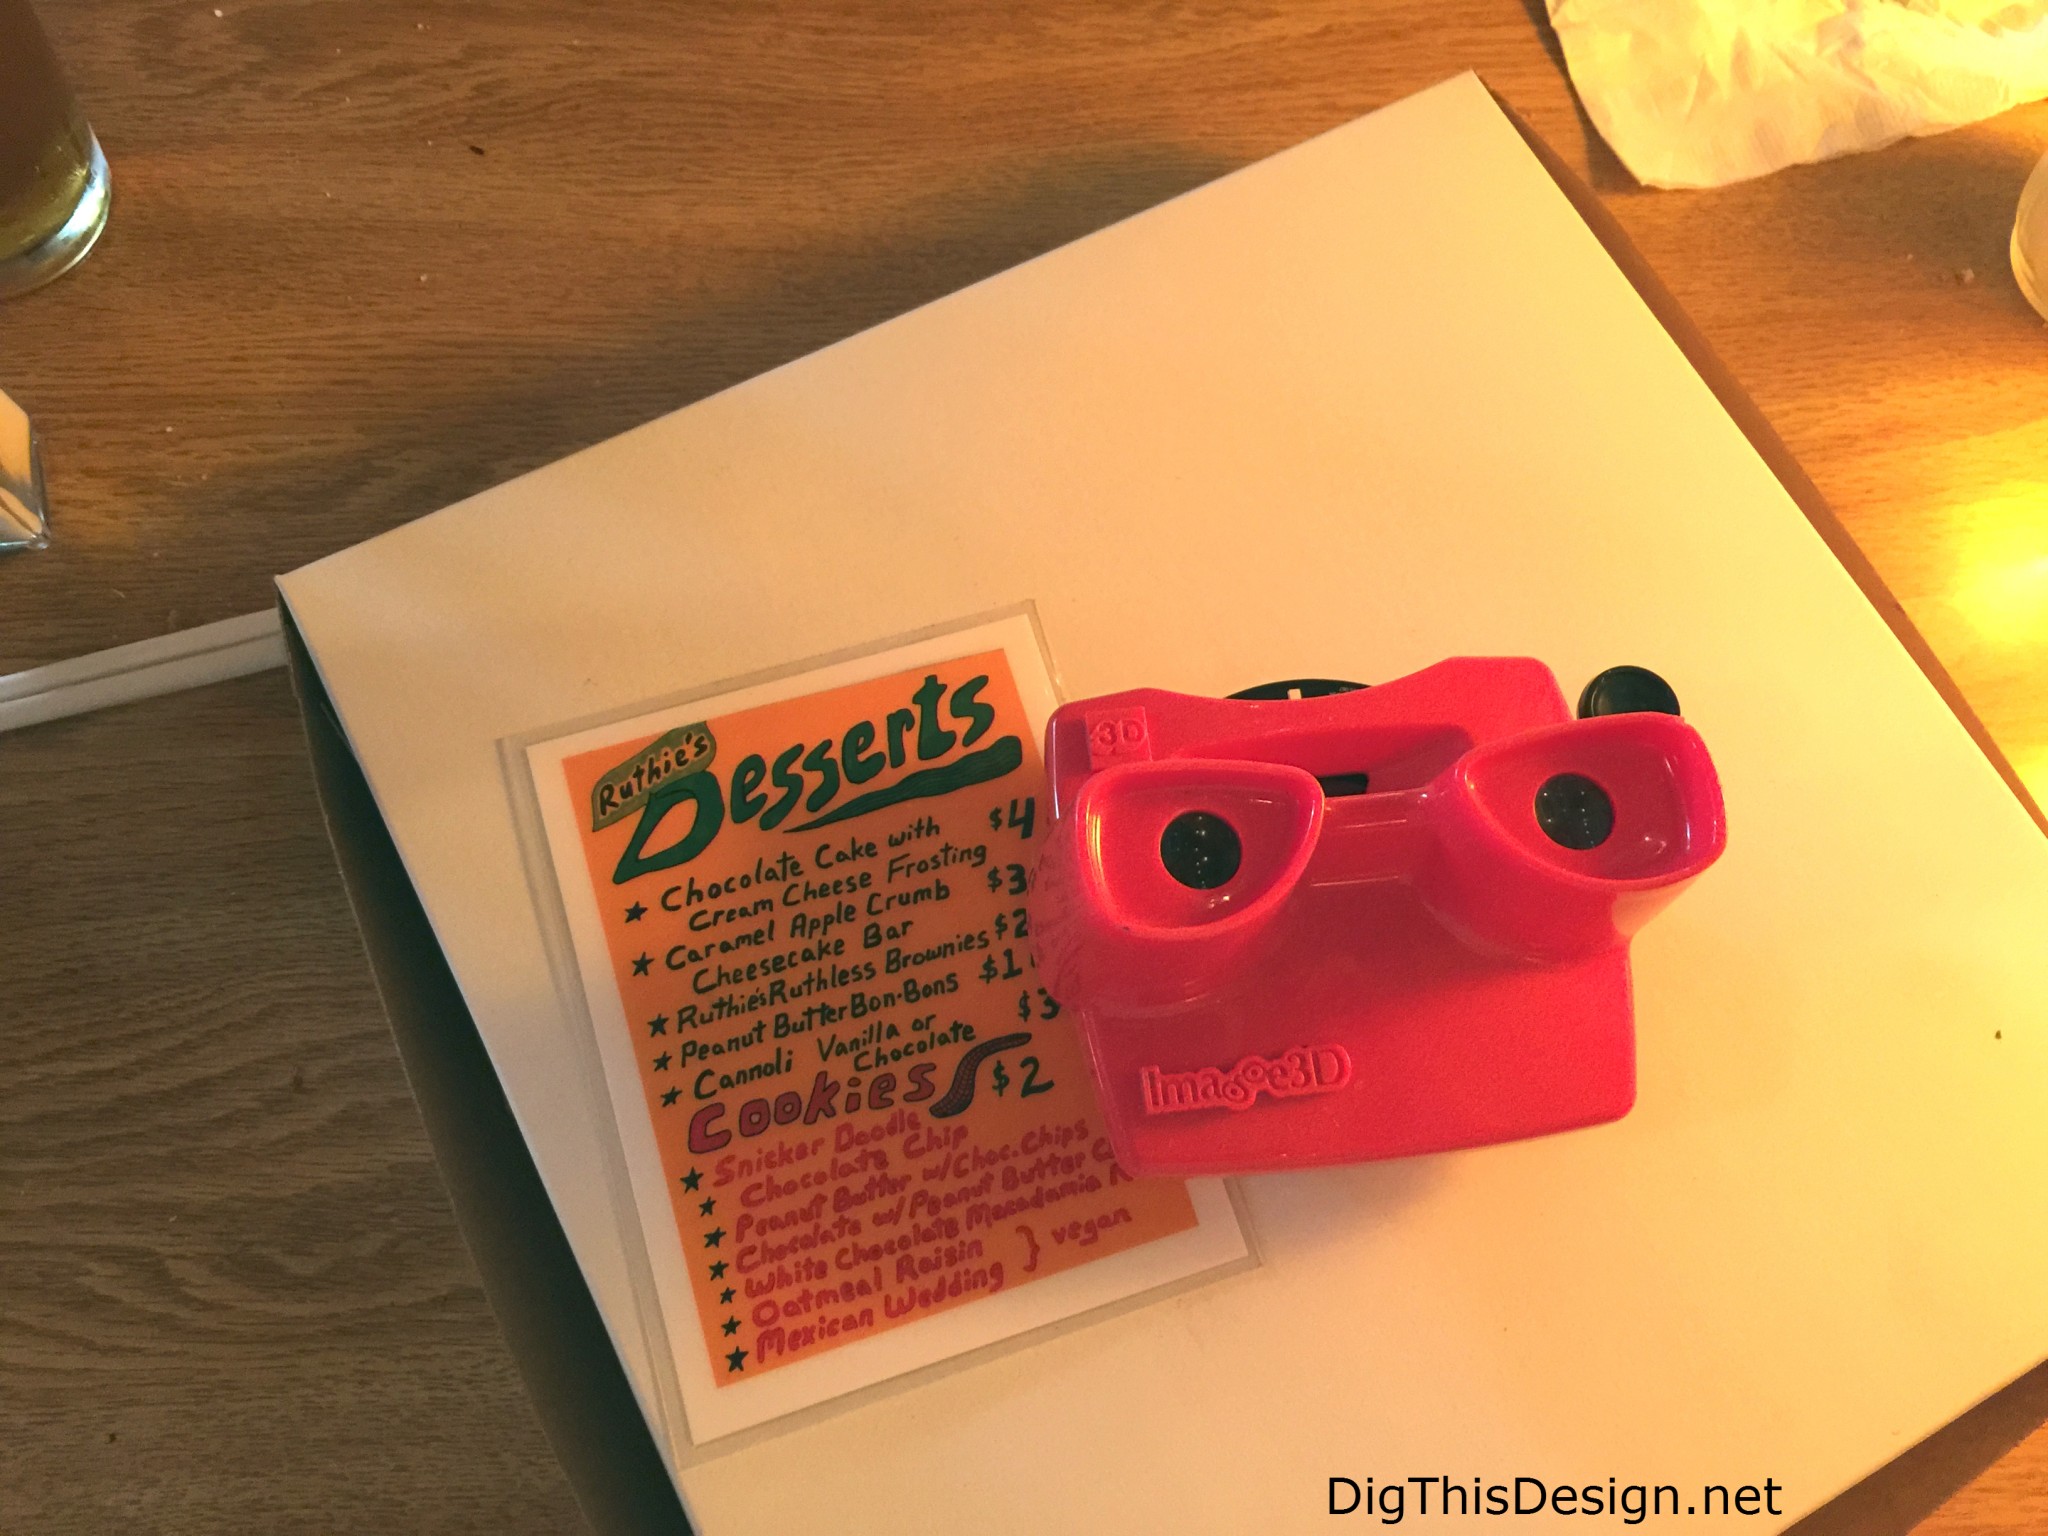 Satchel's menu of homemade deserts is in a vintage viewfinder toy